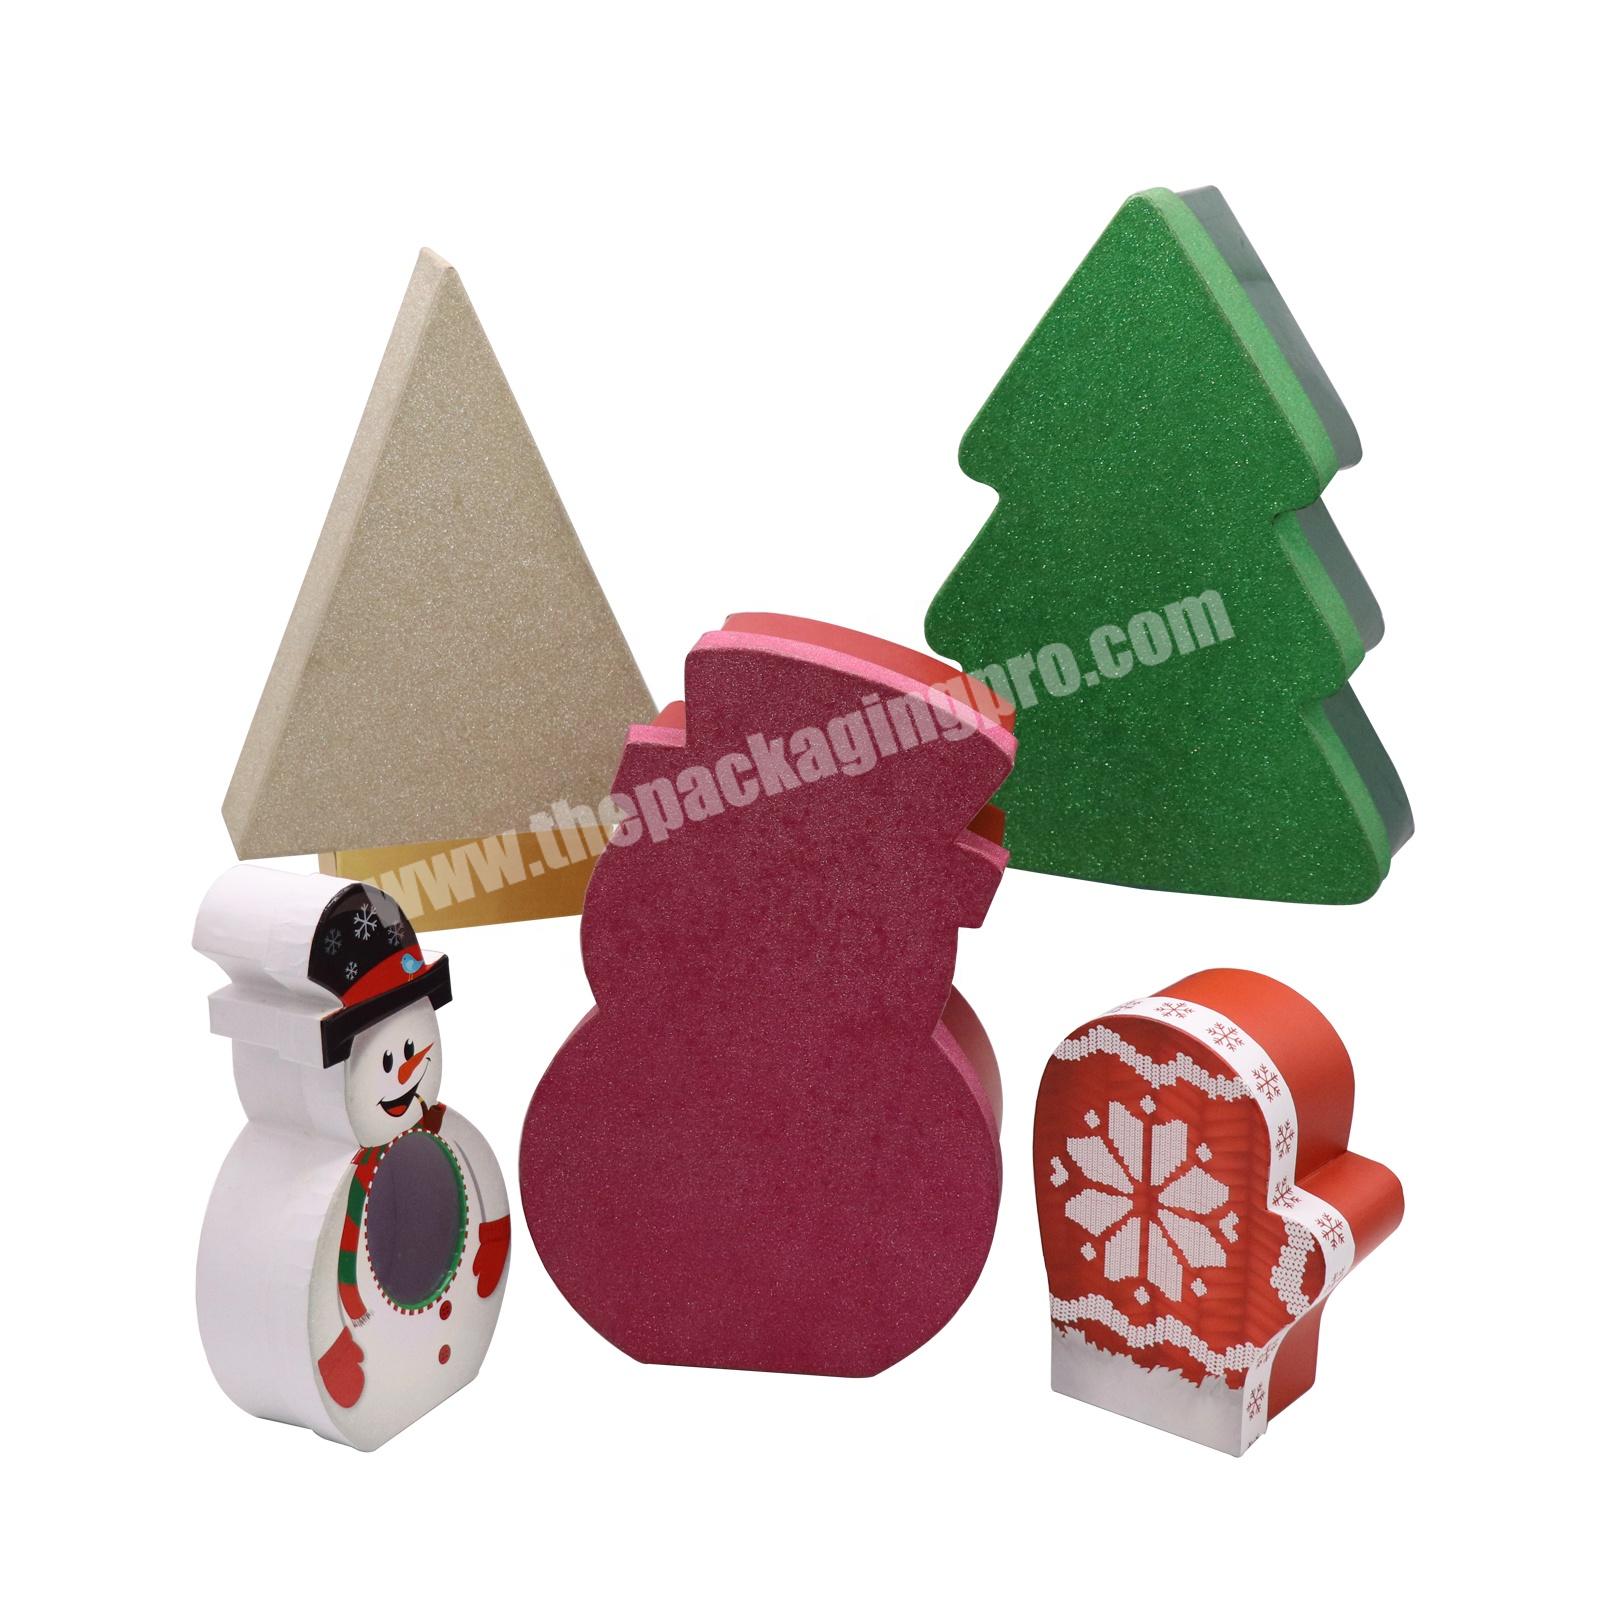 Snowman shaped paper cardboard gift box with lid luxury empty glitter Christmas gift packaging boxes custom printed paper boxes